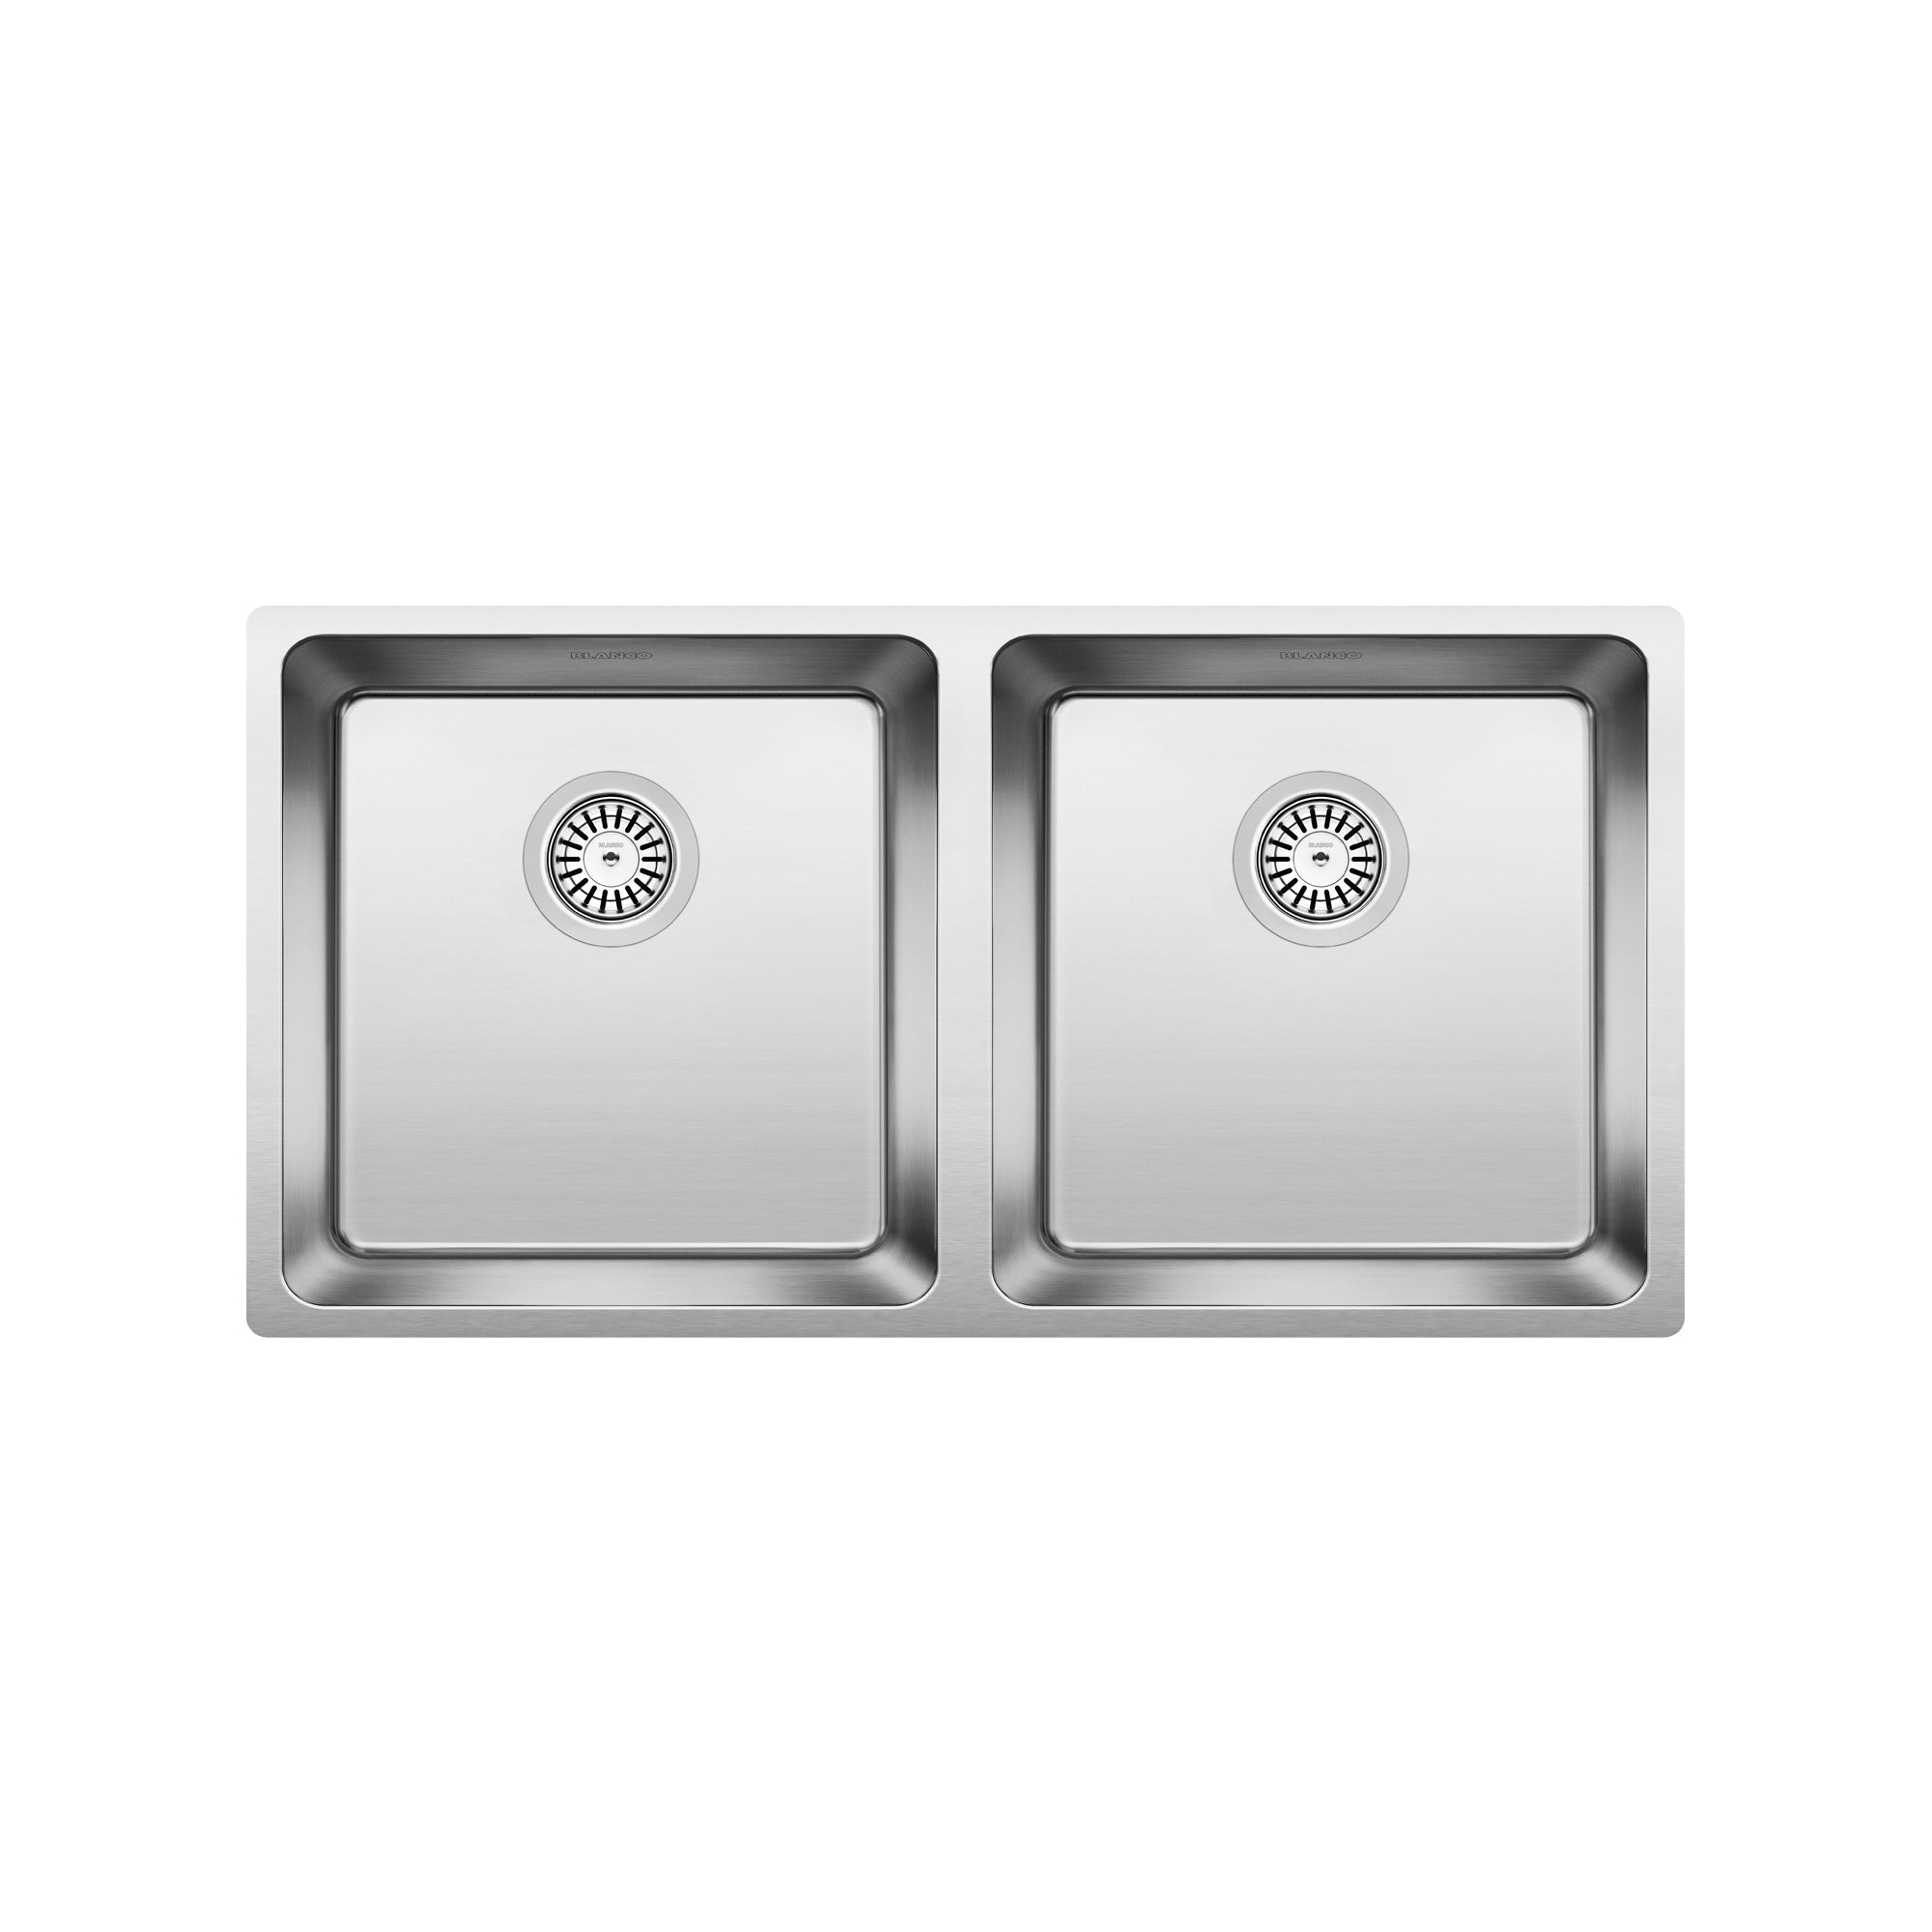 Blanco 401334- ANDANO U 2 Double Bowl Undermount Sink, Stainless Steel - FaucetExpress.ca